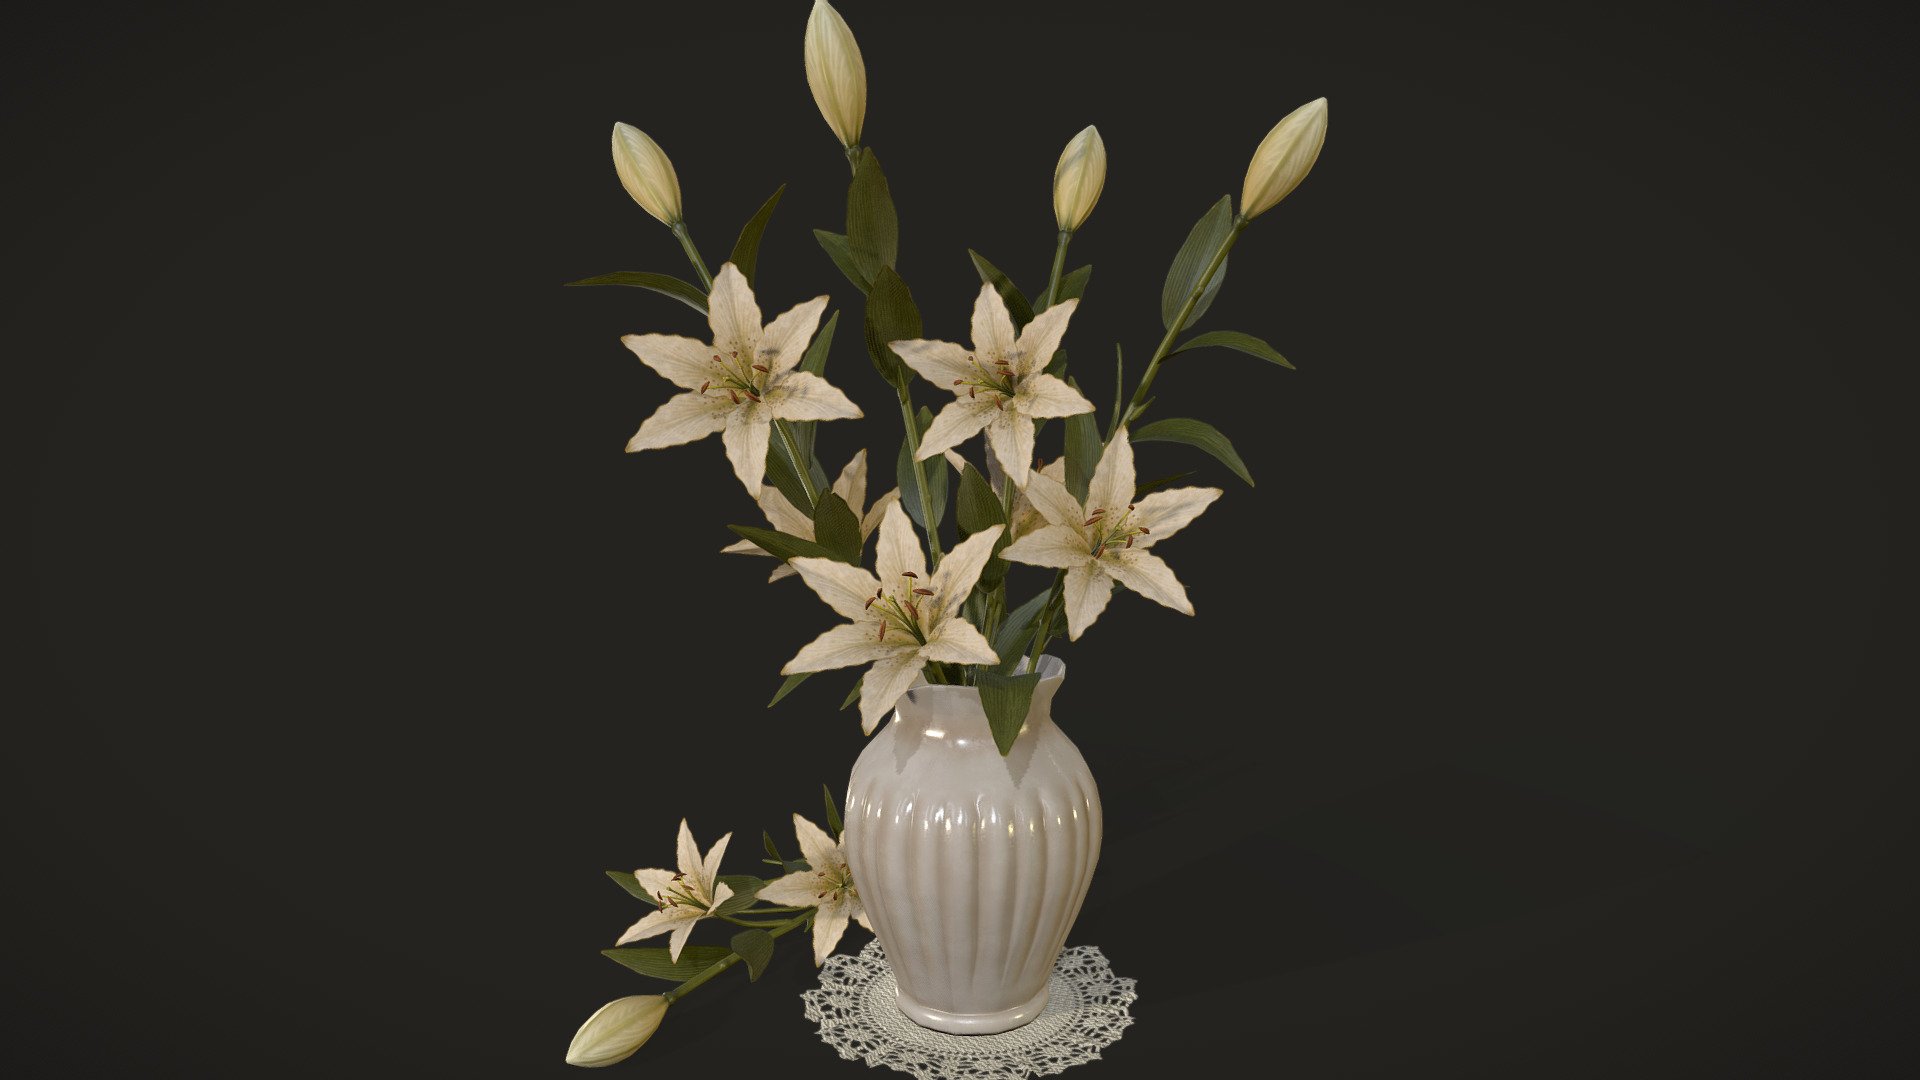 Bouquet with Lilies it's a lowpoly game ready model with unwrapped UVs, PBR textures, ready to use in any game engine.

This asset includes 3 separate objects: vase with flowers, knitted napkin and flower branch.

Normal map was baked from a high poly model.

UVs: channel 1: overlapping; channel 2: non-overlapping (for baking lightmaps)

Formats: FBX, Obj. Marmoset Toolbag scene 3.08 (.tbscene)  Textures format: TGA. Textures resolution: 2048x2048px. 

Textures set includes:




Metal_Roughness: BaseColor, Roughness, Metallic, Normal, Height, AO.

Unity 5 (Standart Metallic): AlbedoTransparency, AO, Normal, MetallicSmoothness

Unreal Engine 4: BaseColor, OcclusionRoughnessMetallic, Normal.

More screenshots on Artstation: https://www.artstation.com/artwork/58ORy8



Artstation: https://www.artstation.com/tatianagladkaya

Instagram: https://www.instagram.com/t.gladkaya_ - Bouquet with Lilies - 3D model by Tatiana Gladkaya (@tatiana_gladkaya) 3d model